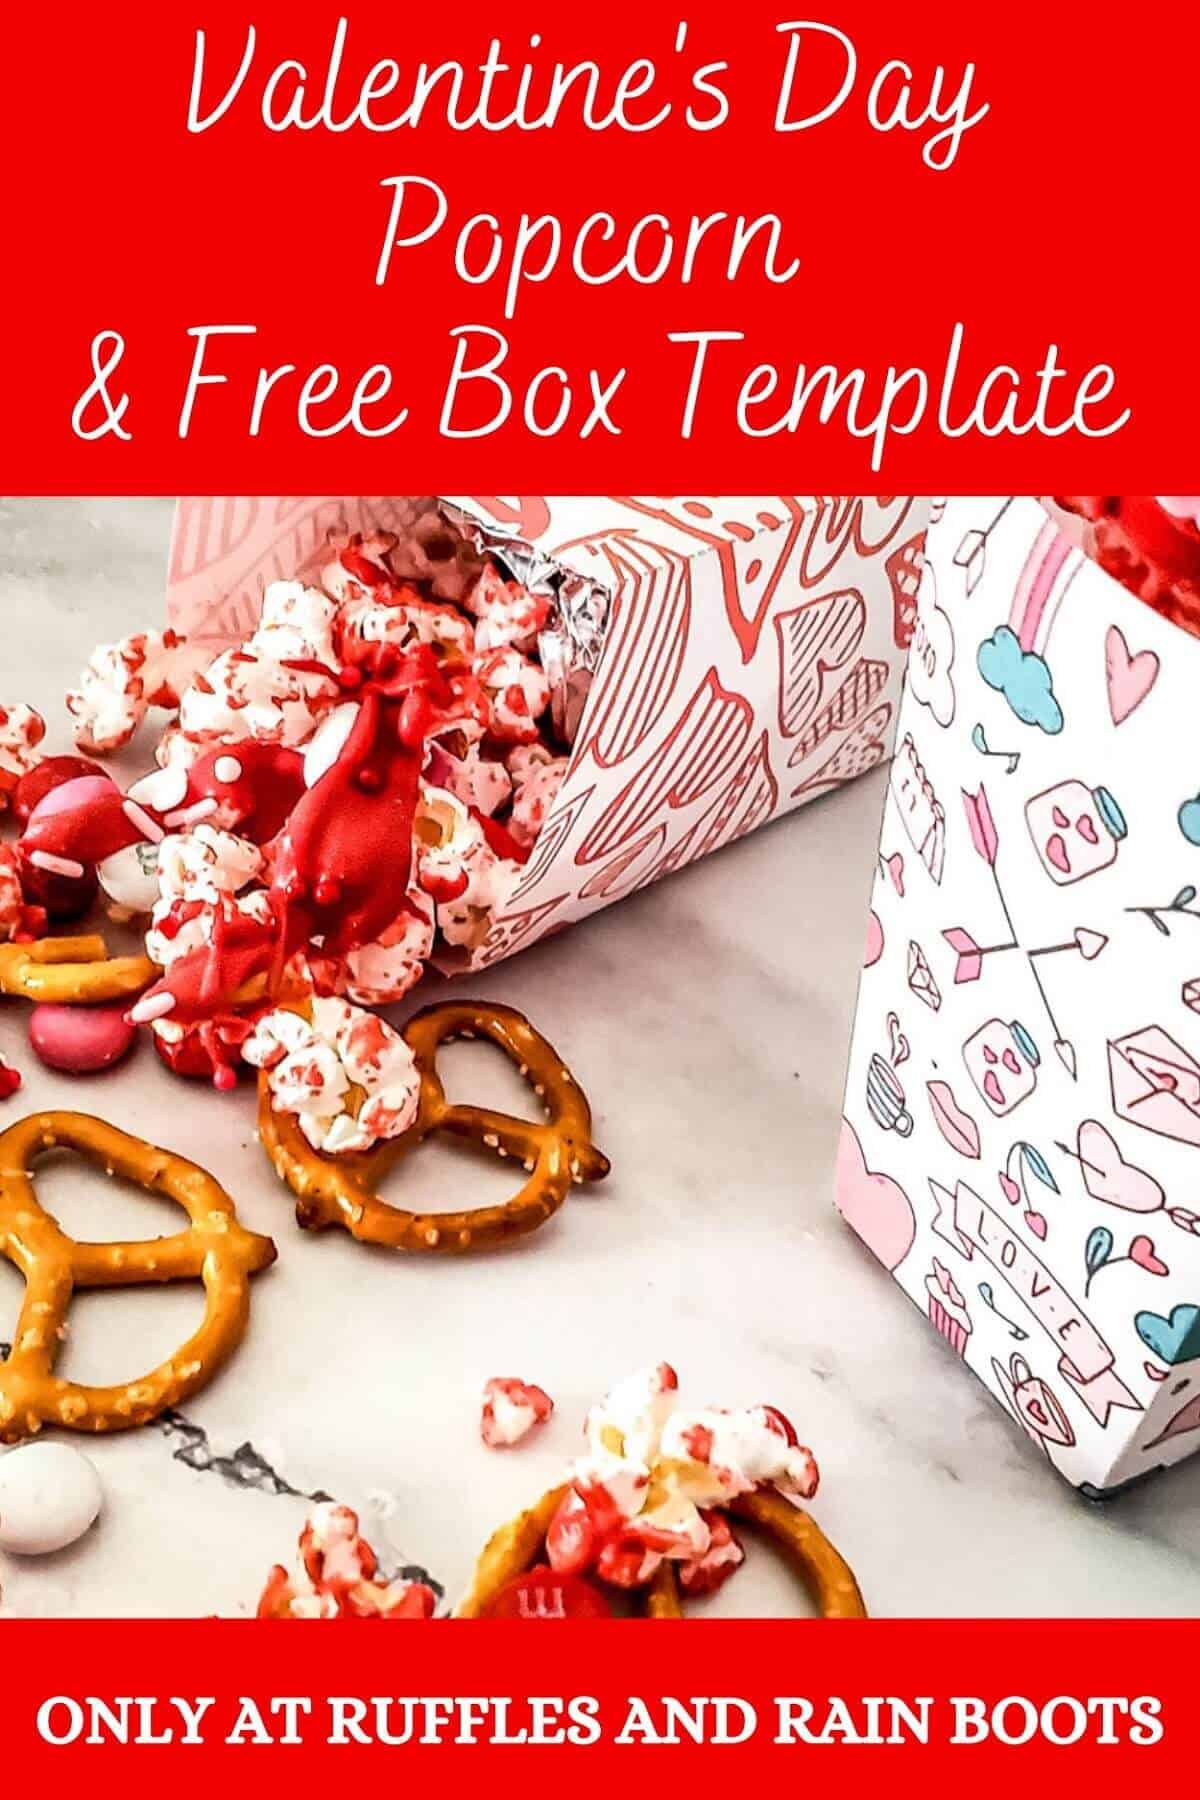 Image with 2 white vertical boxes, with one laying down, printed with Valentine's style patterns, filled with popcorn mix with some of the mix scattered on a marble surface.